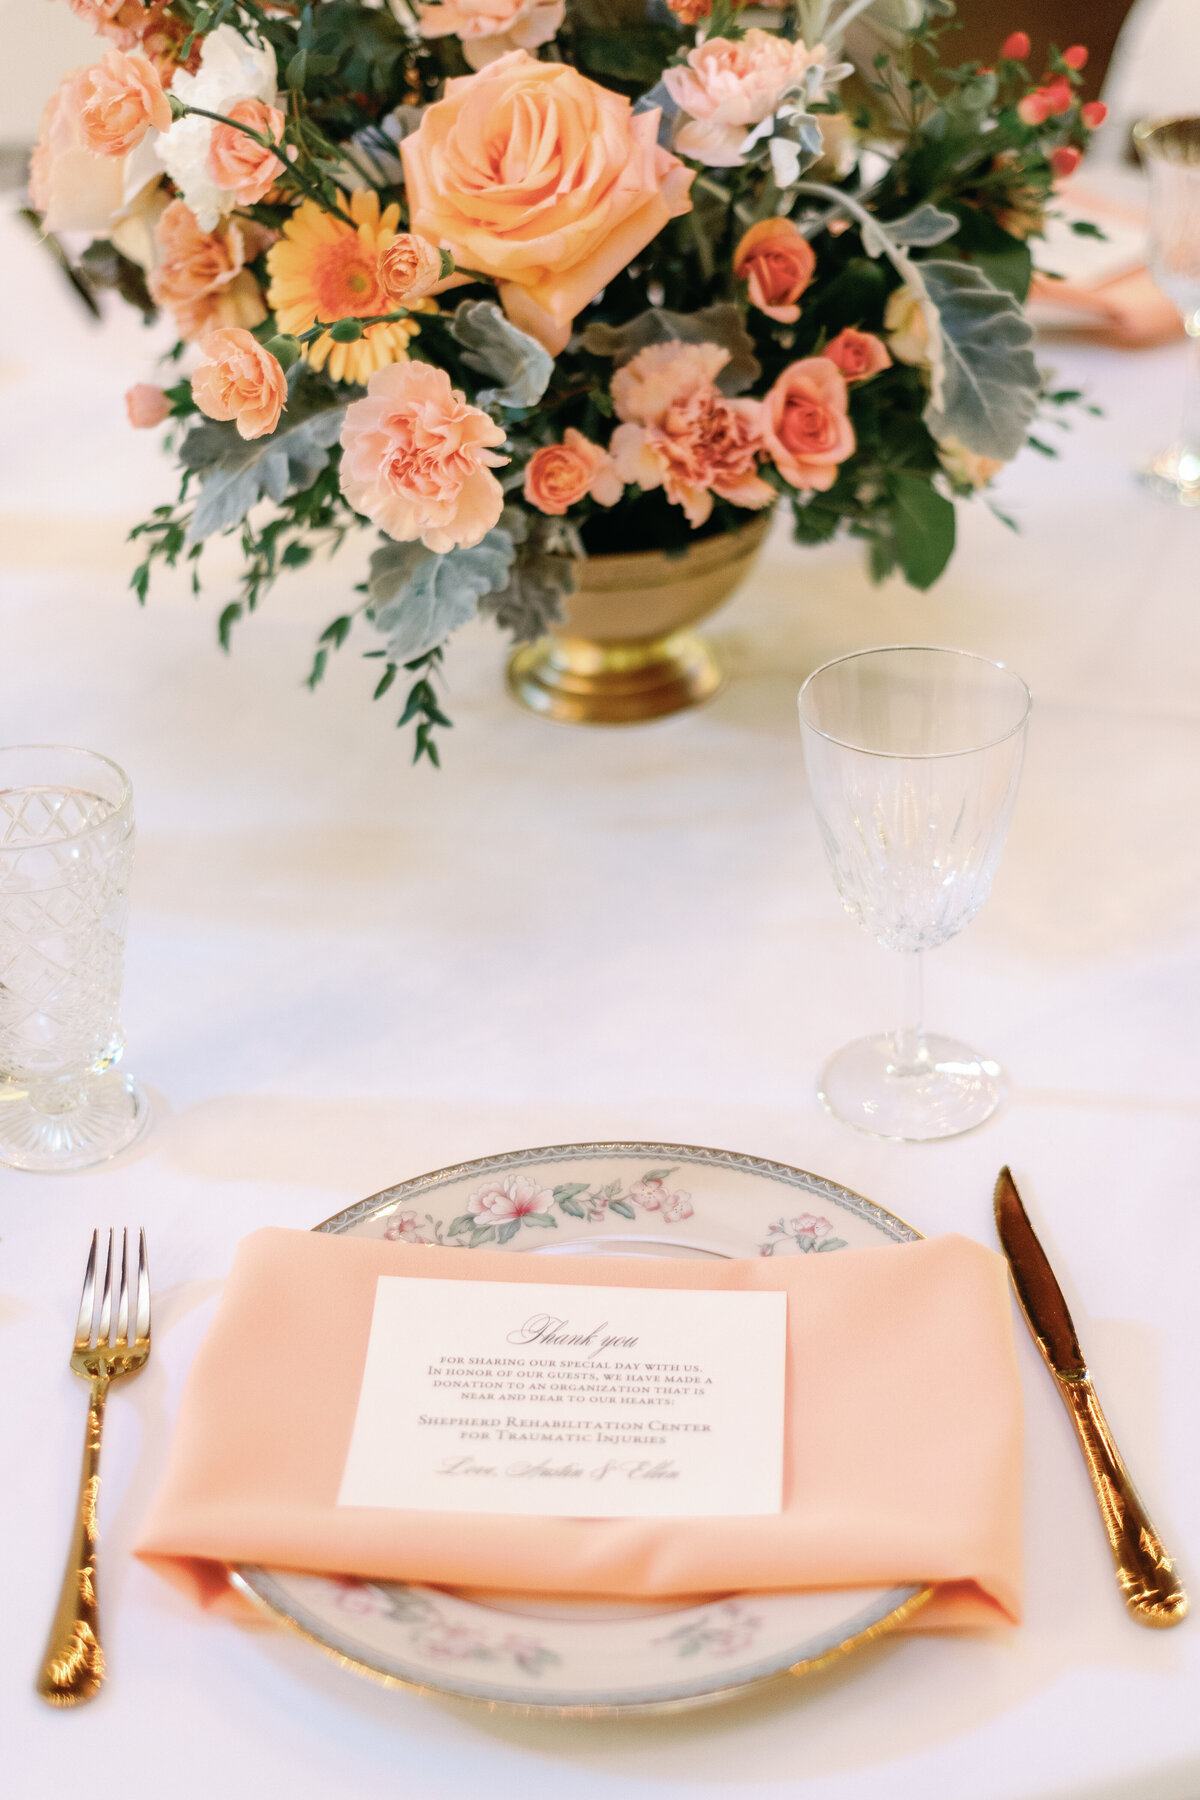 Ellen and Austin - Lee Chapel and Black Fox Farms - Reception - East Tennessee Photographer - Alaina René Photography-9